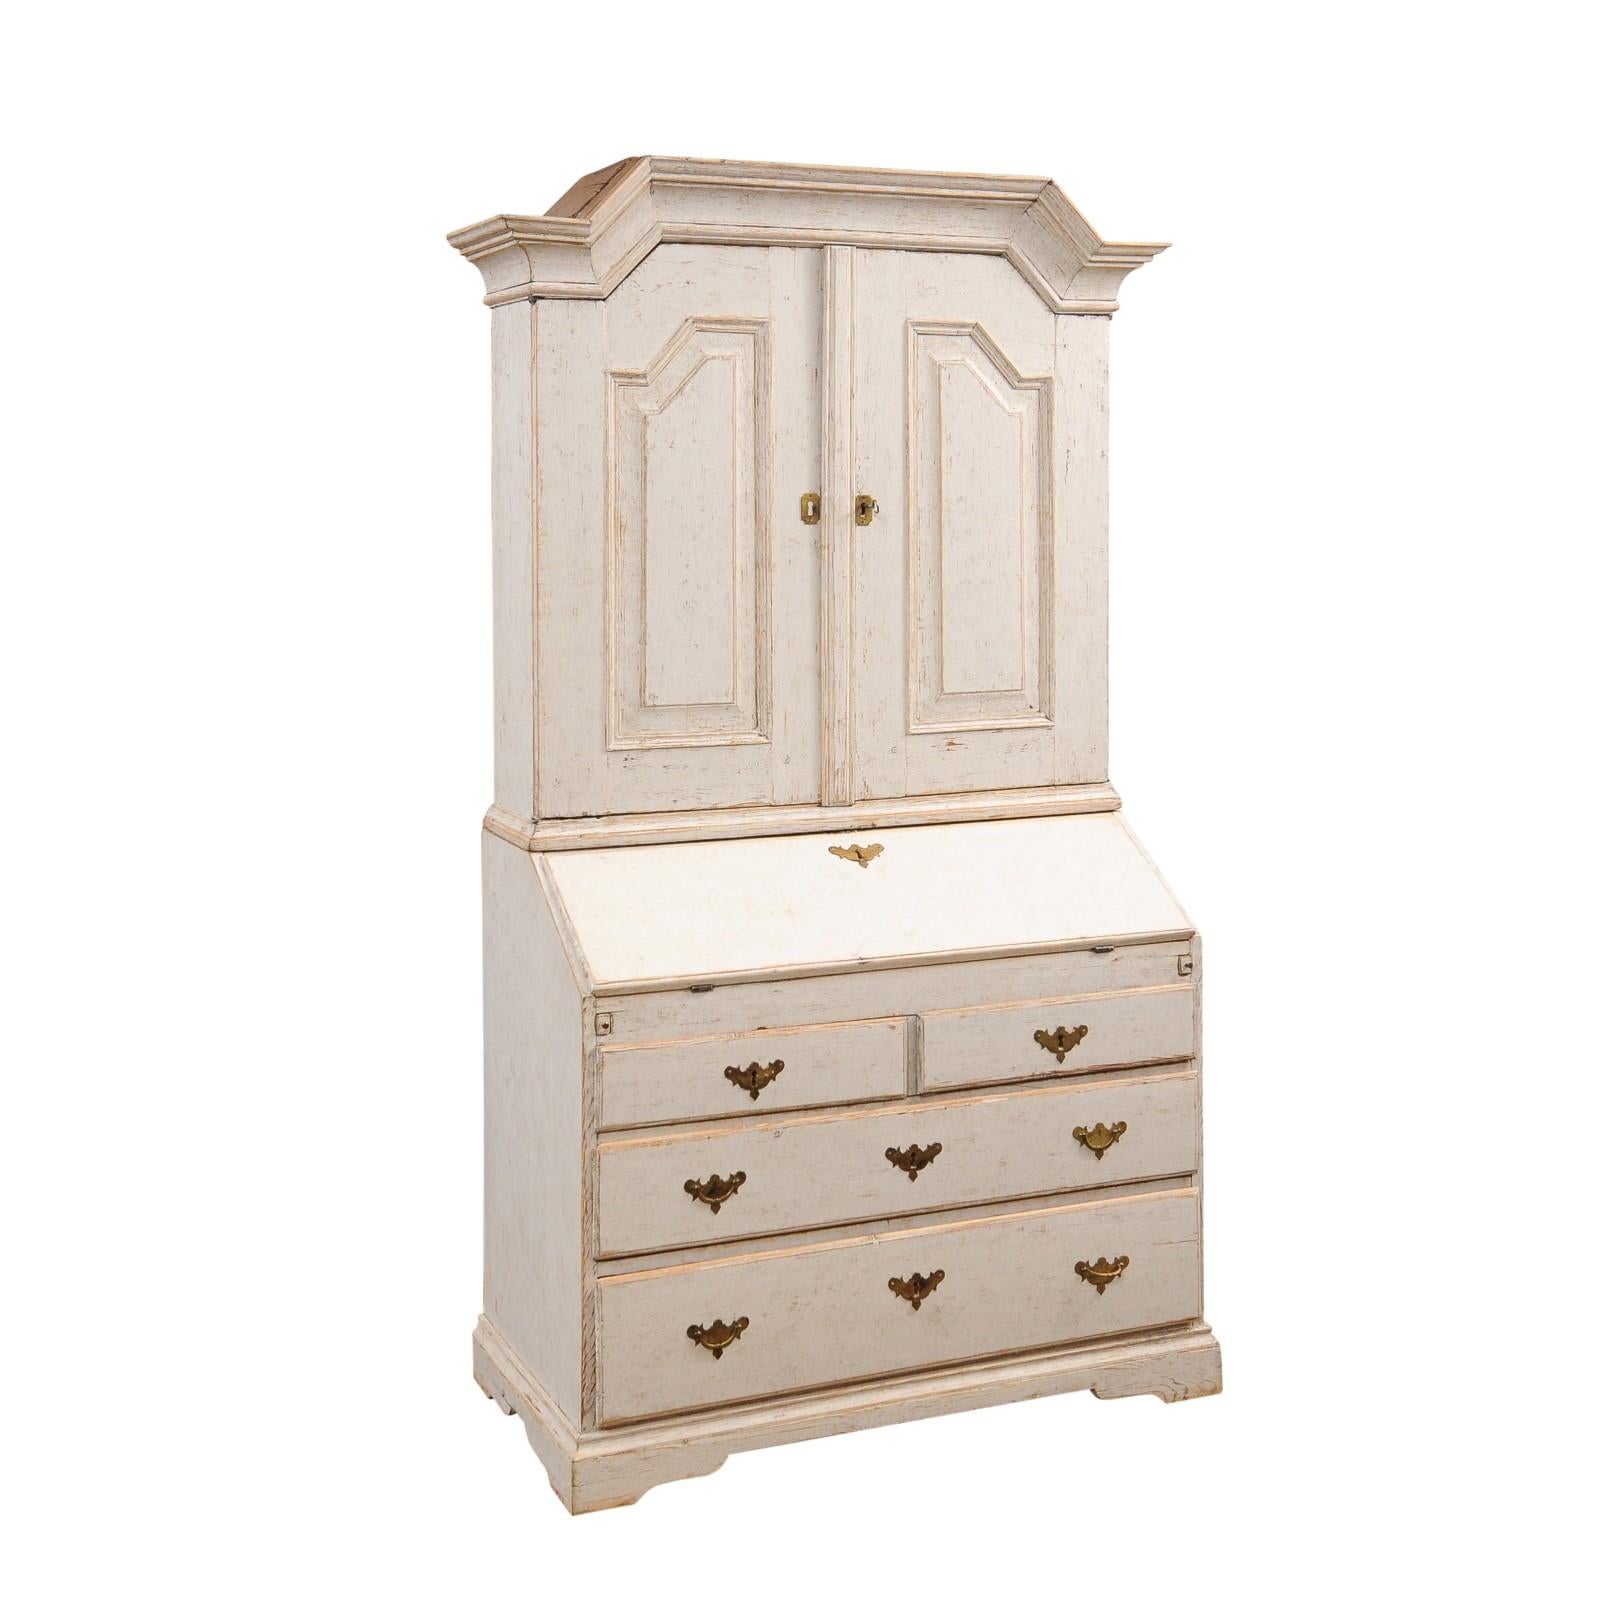 A Swedish Baroque tall secretary from circa 1770, with slant front desk, light Gustavian gray painted finish, two doors and four drawers. Experience the timeless elegance of this Swedish tall secretary from circa 1770, a piece that seamlessly